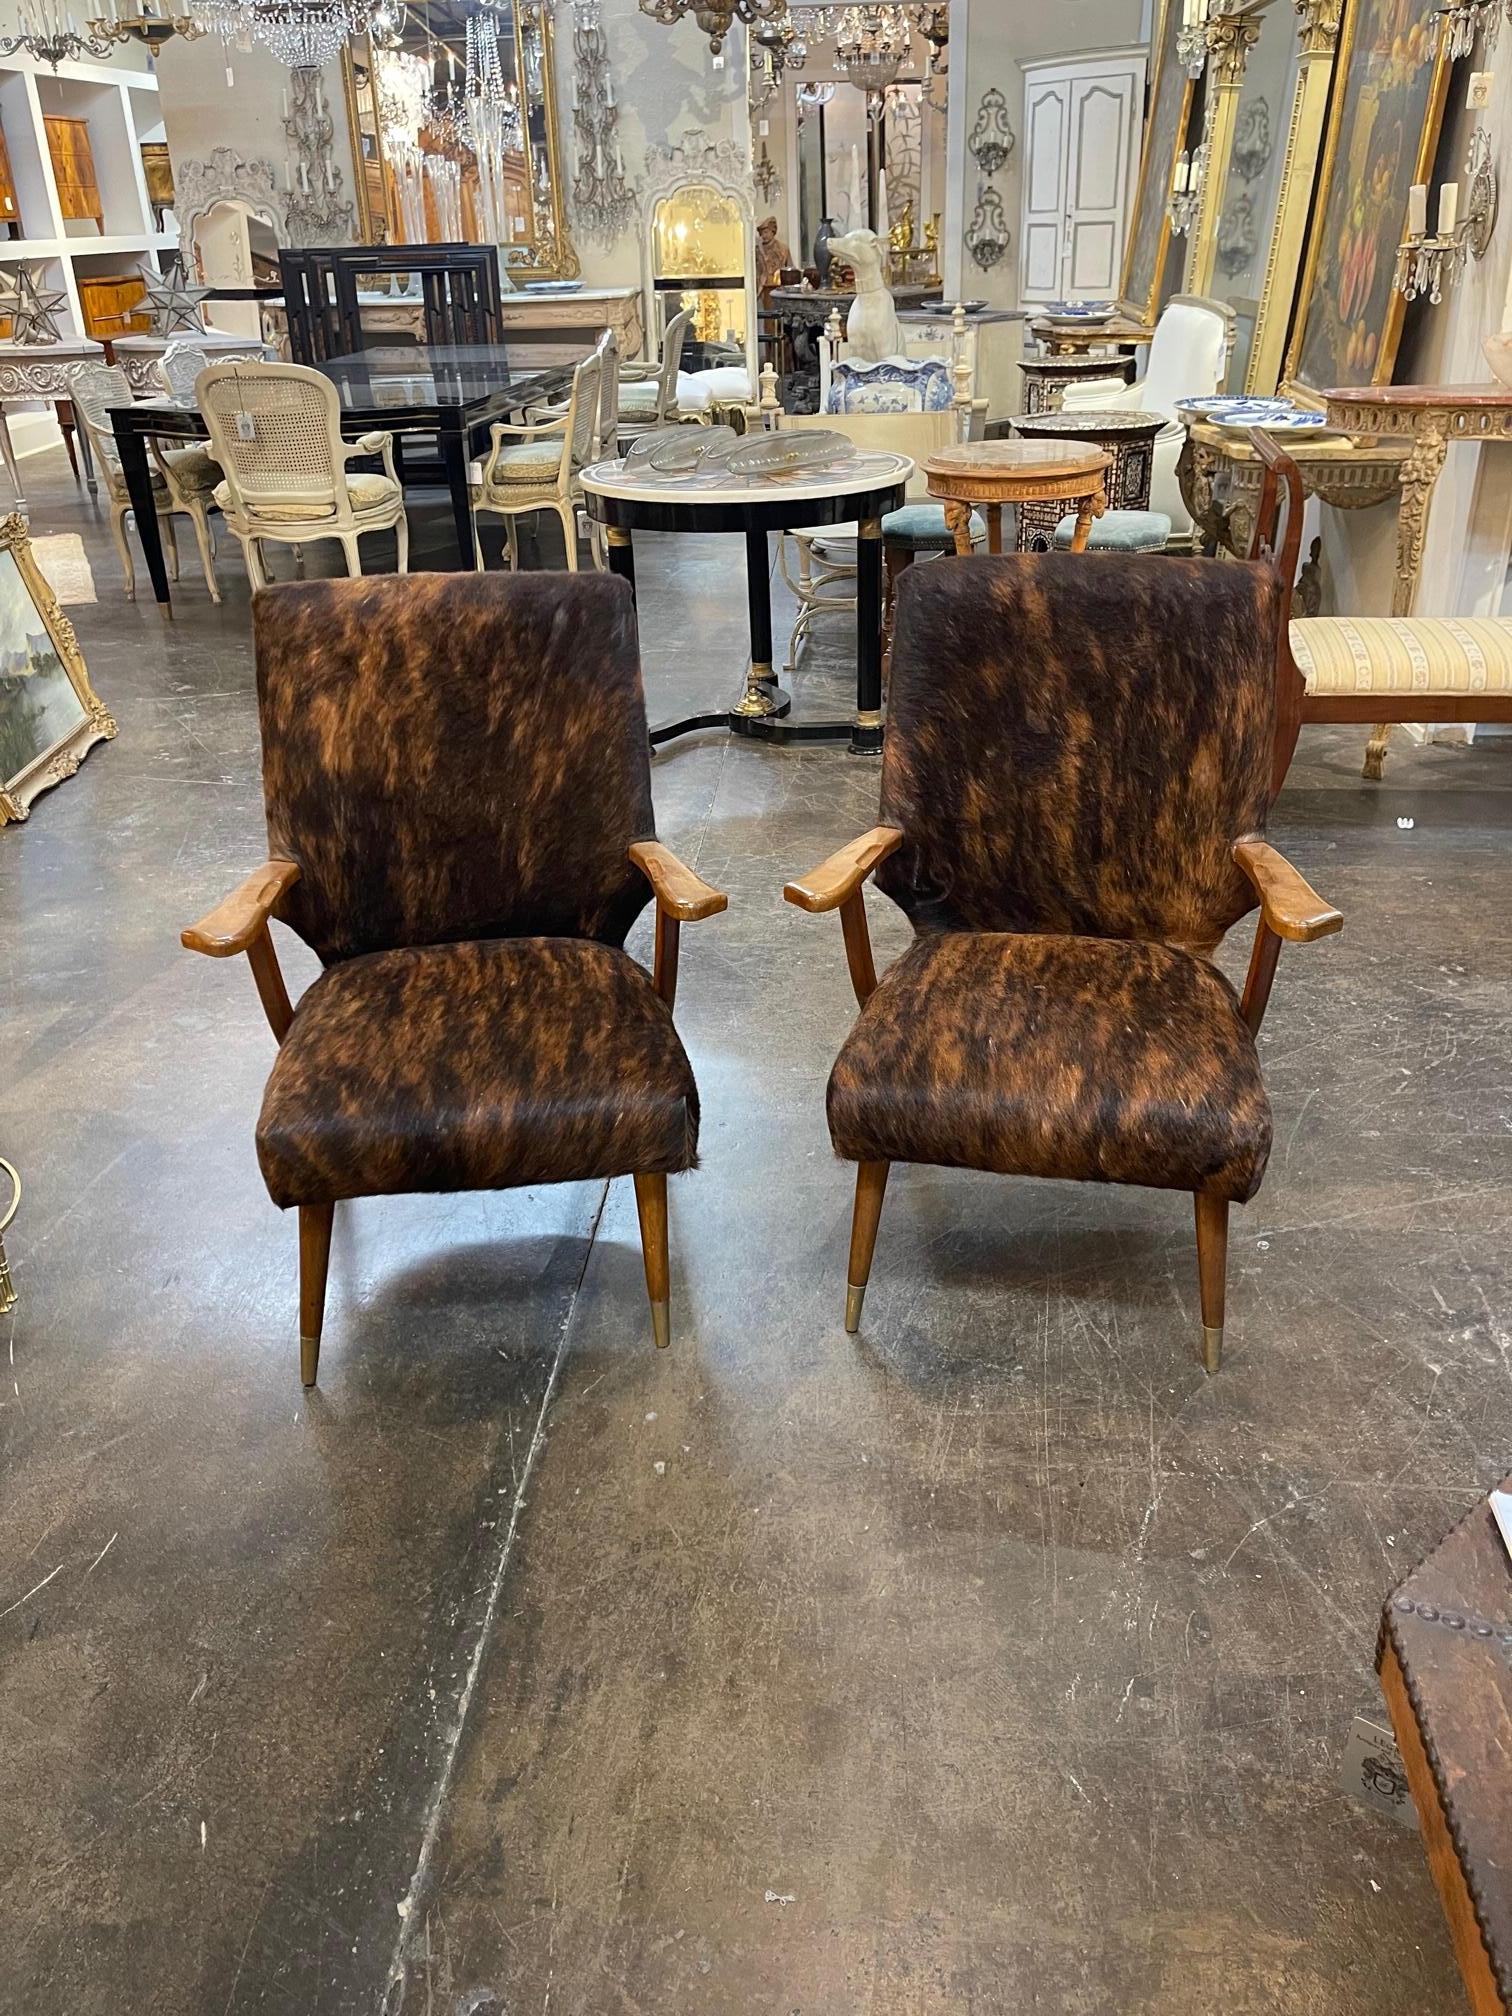 Lovely pair of Mid-Century Modern armchairs upholstered in cowhide in the style of designer Gio Ponti. Beautiful clean lines. Very stylish!